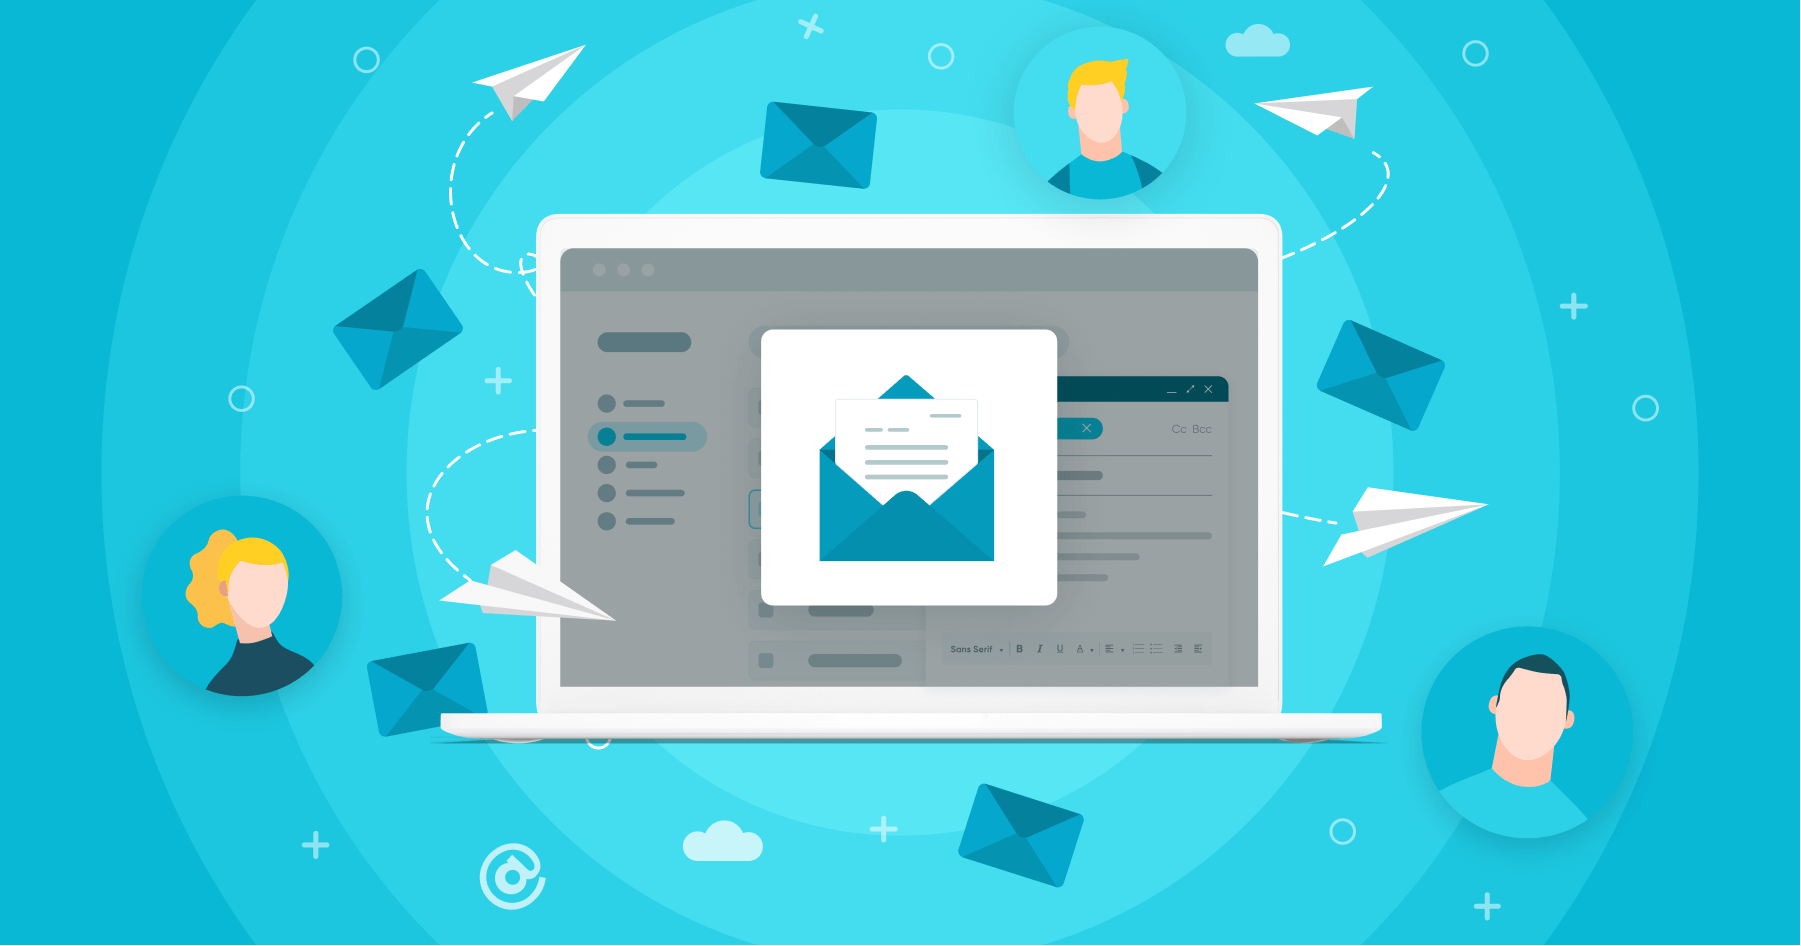 Building a Cold Email Campaign